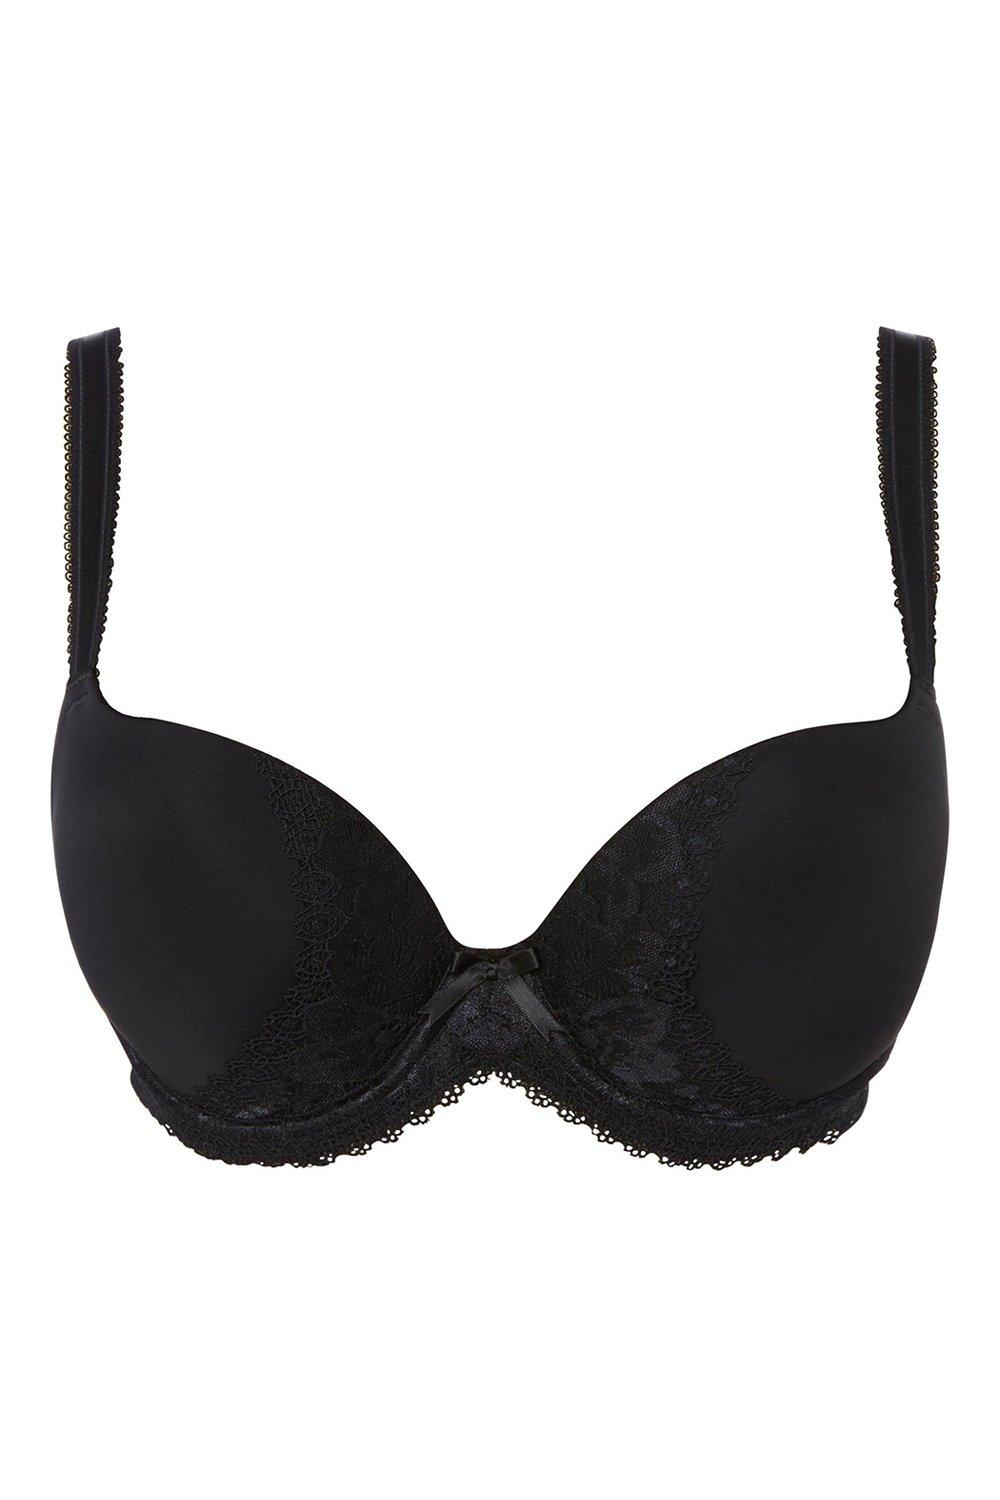 Dunnes Stores  Black Isla Lace Underwired Balcony Bra